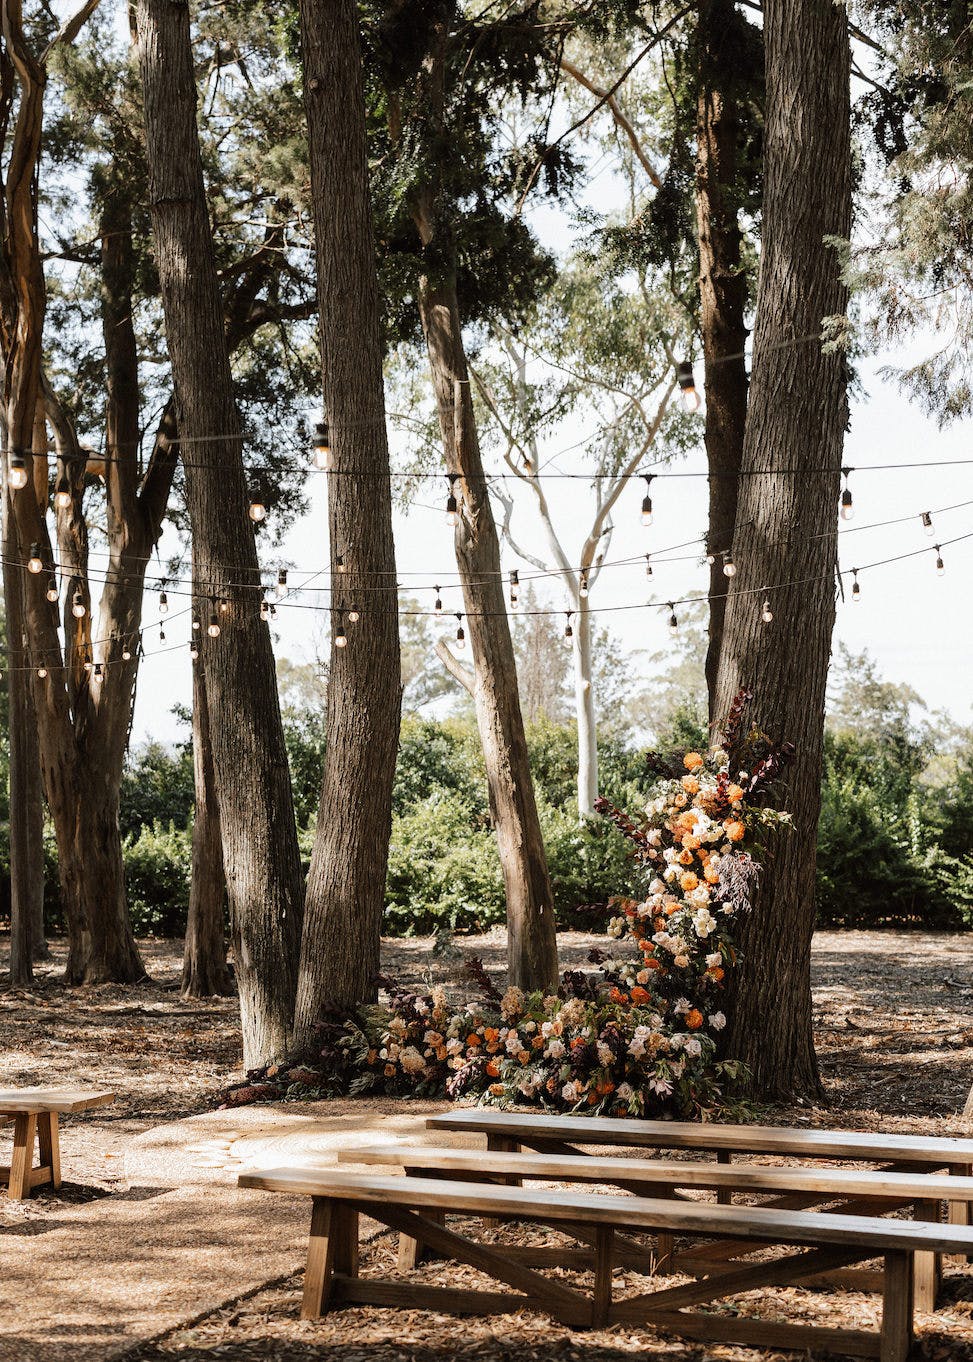 Outdoor wedding ceremony set-up in a wooded area with trees adorned with string lights. Wooden benches are arranged on the ground covered in wood chips. A floral arrangement of colorful flowers is affixed to one of the trees, creating a serene and picturesque setting.